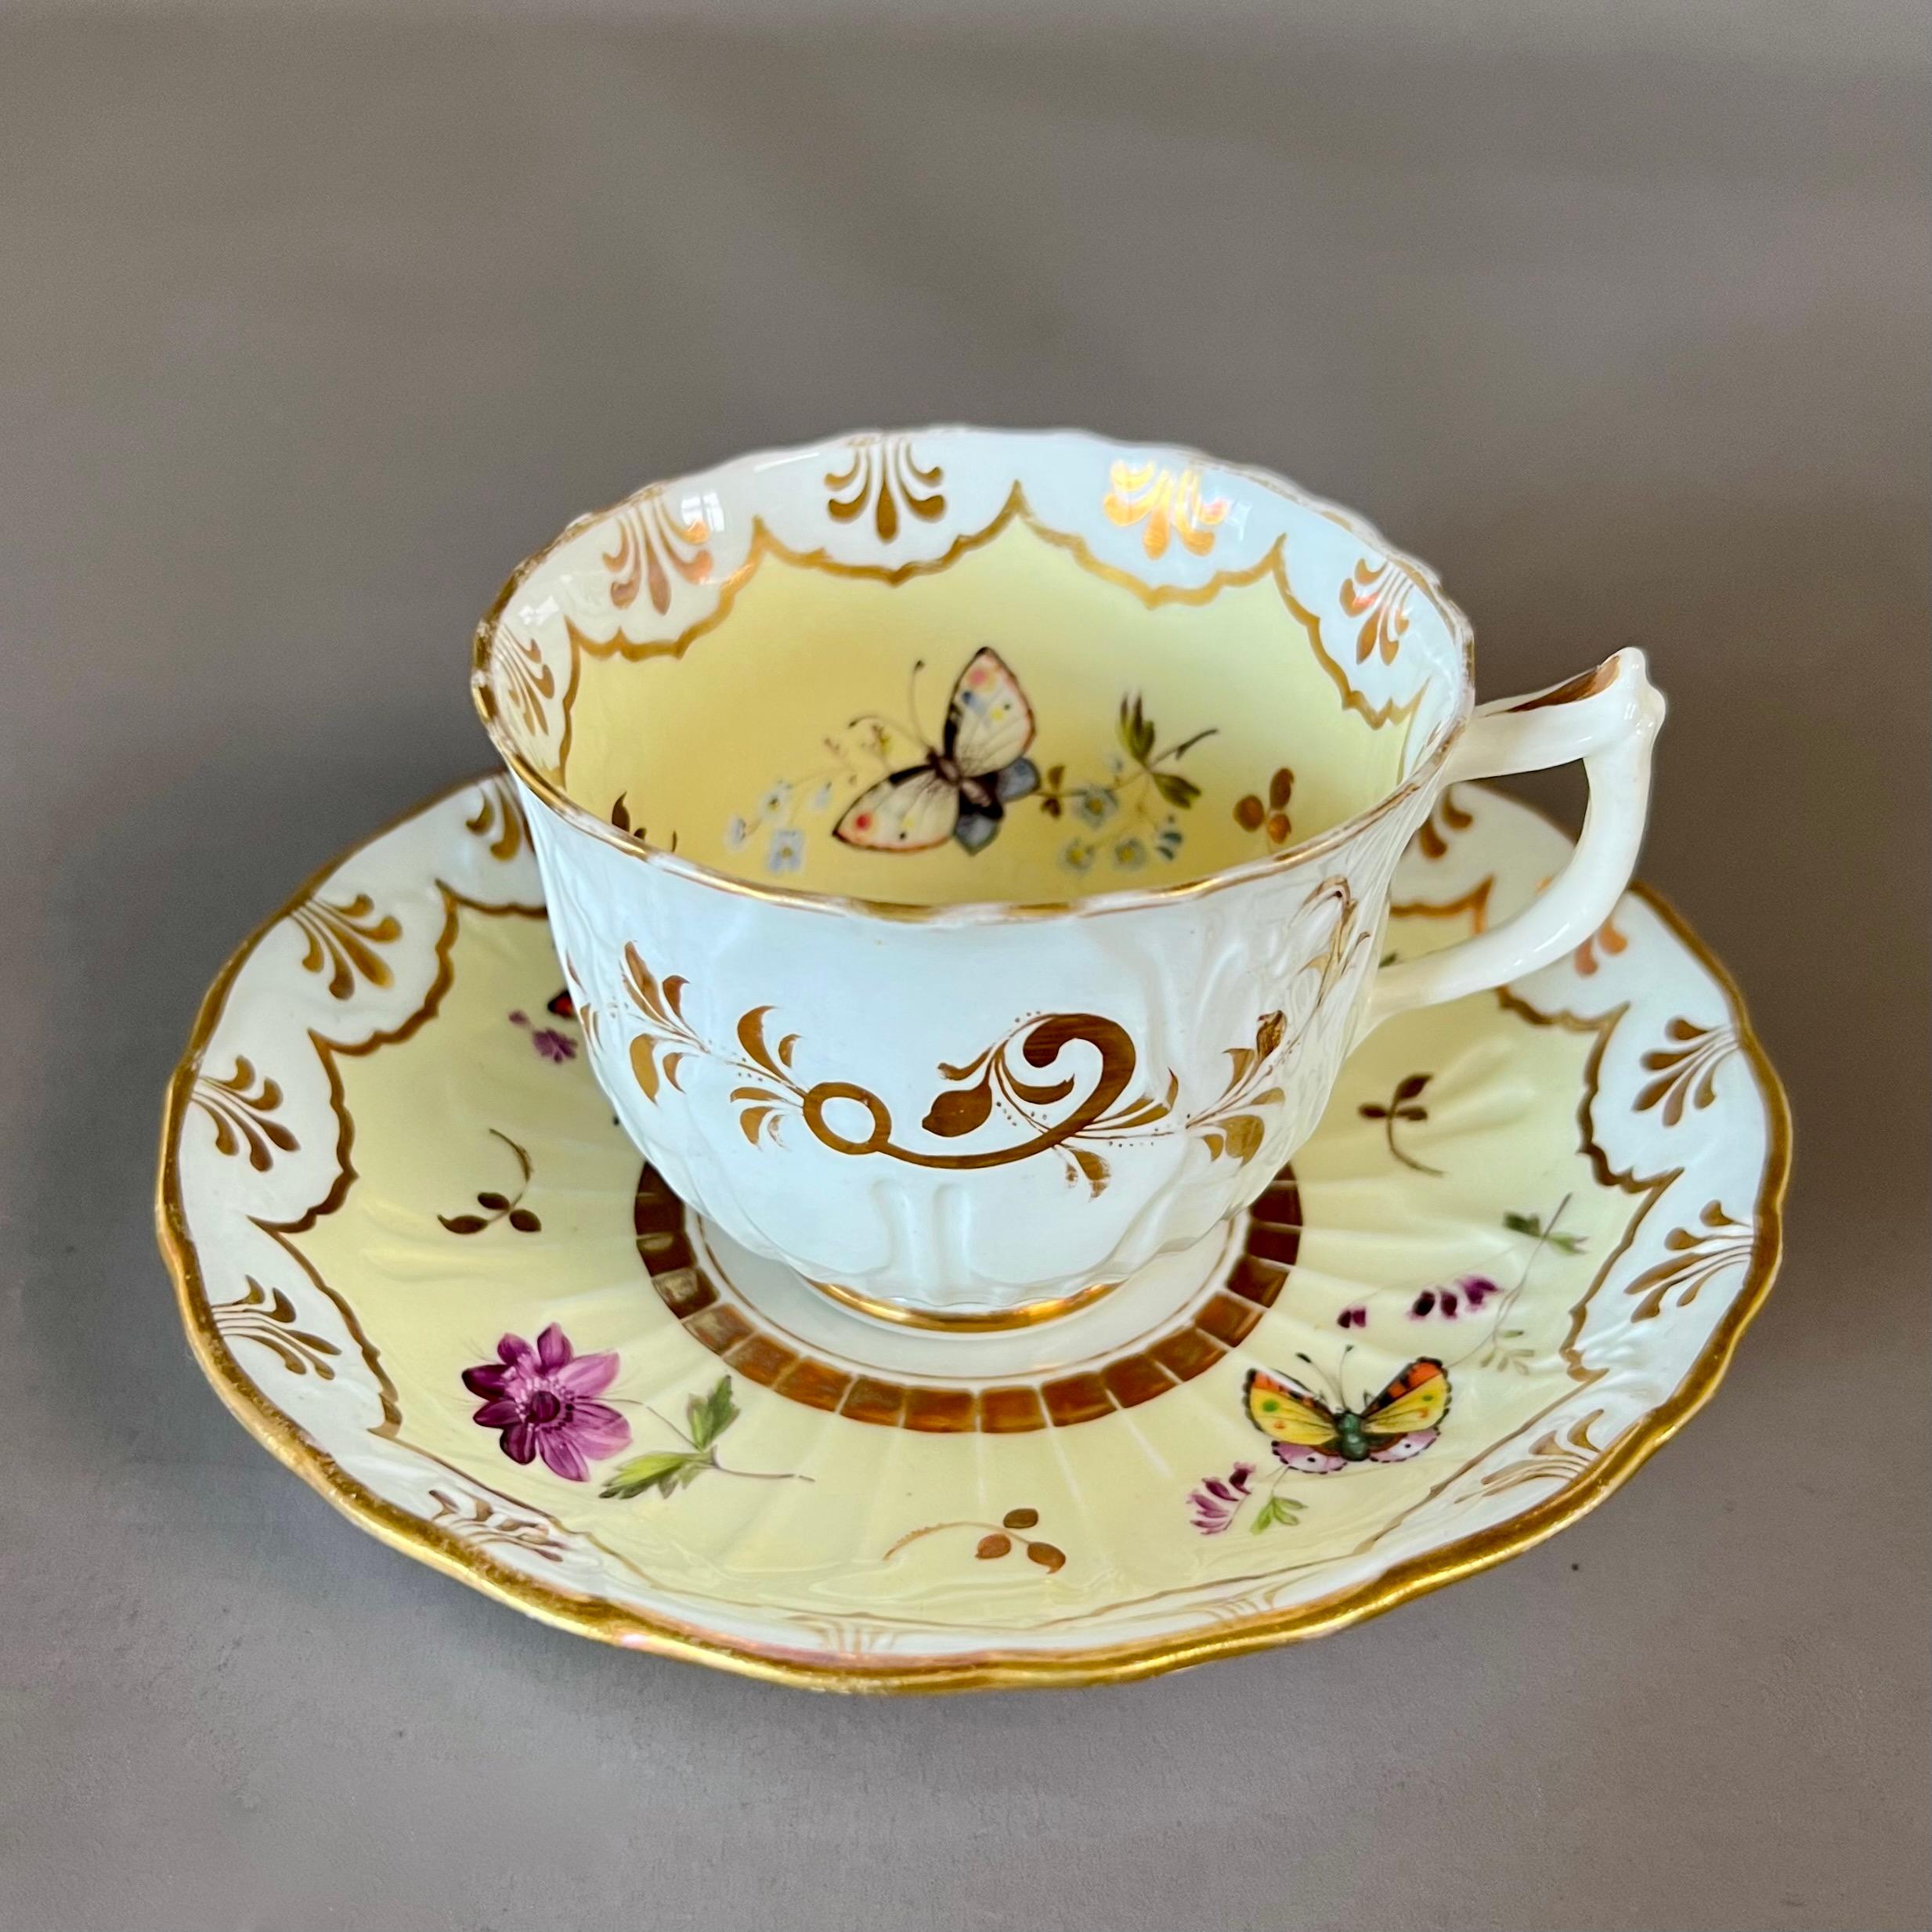 A coffee cup and saucer in “embossed fluted” shape, pale yellow ground with flowers and butterflies

Pattern 4626
Year: ca 1834
Size: teacup 8cm (3.15“),saucer 14.5cm (5.75“) diameter
Condition: excellent, some stacking wear

The Samuel Alcock